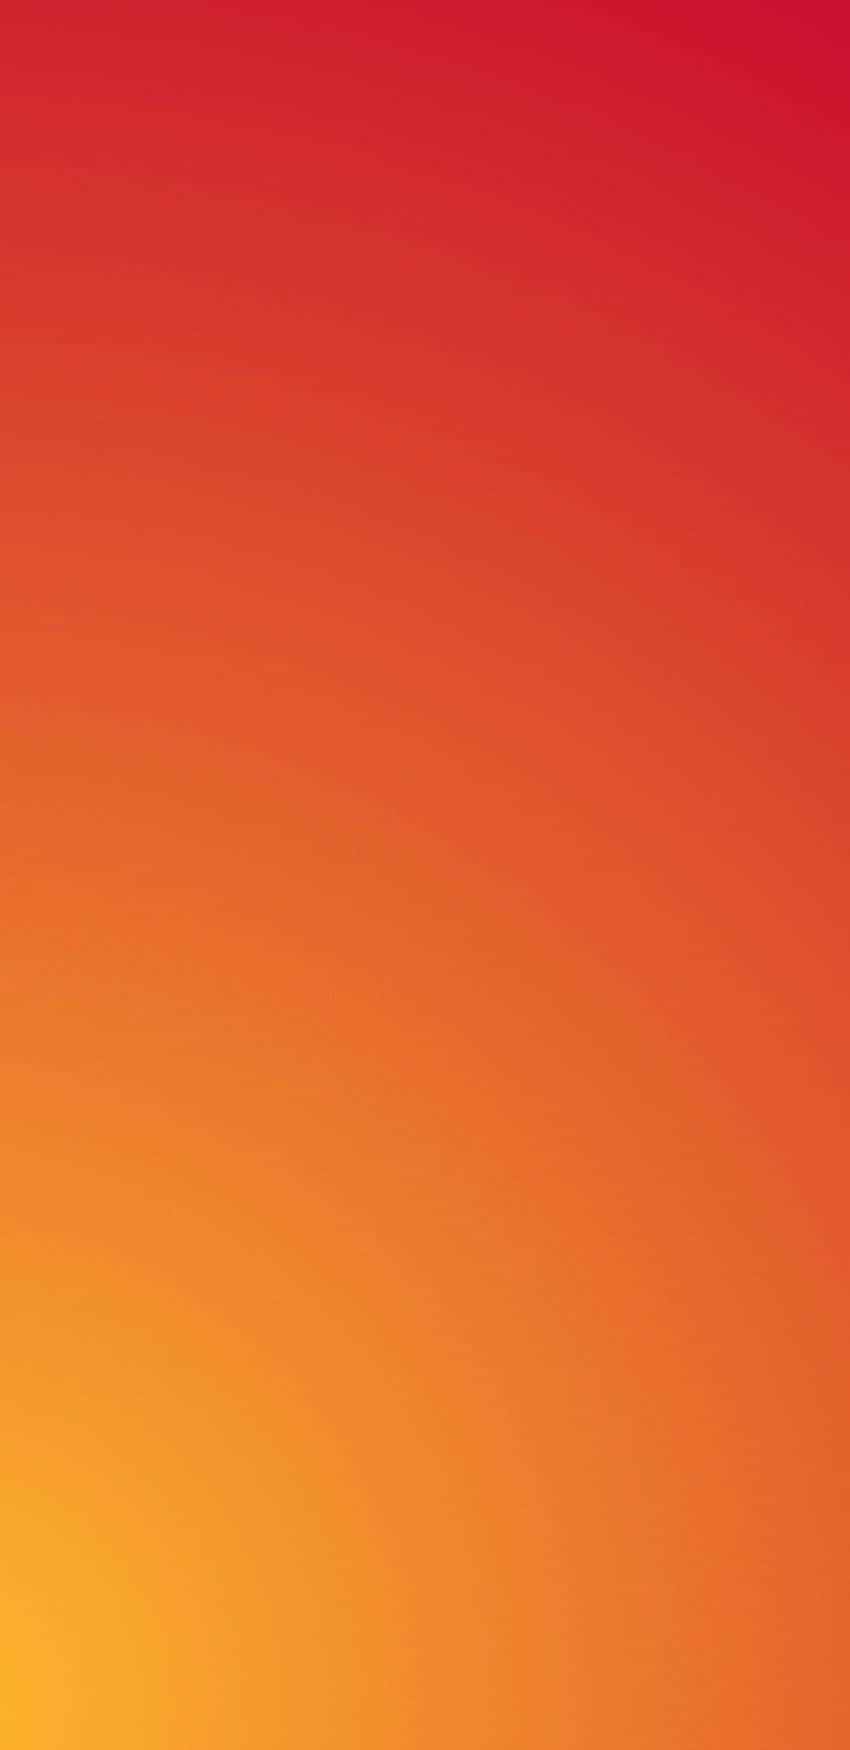 Brighten up your screen with a vibrant orange gradient background.